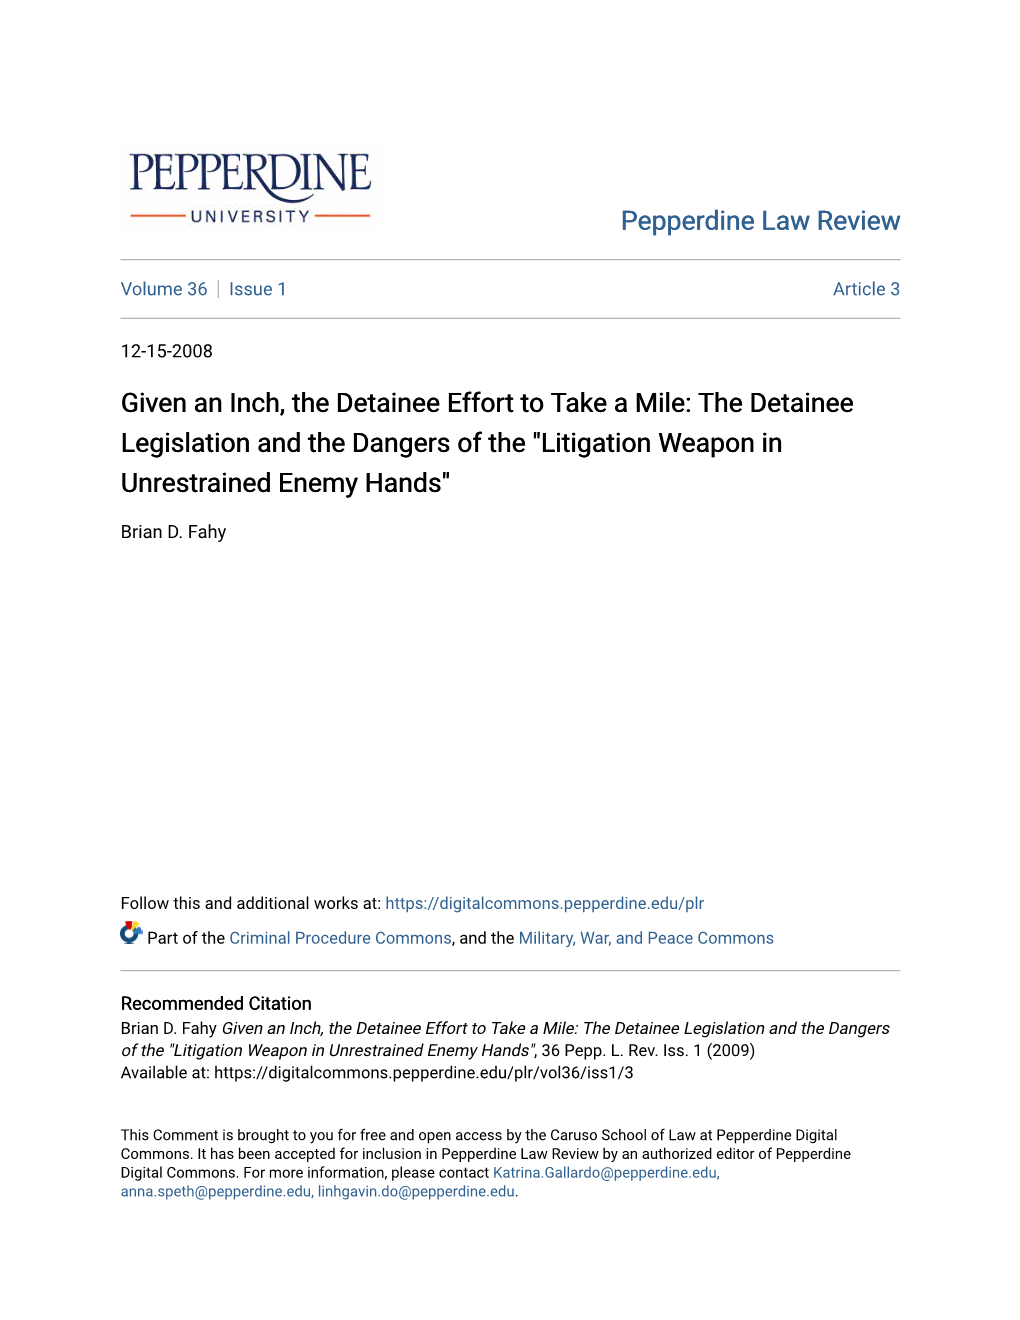 The Detainee Legislation and the Dangers of the "Litigation Weapon in Unrestrained Enemy Hands"